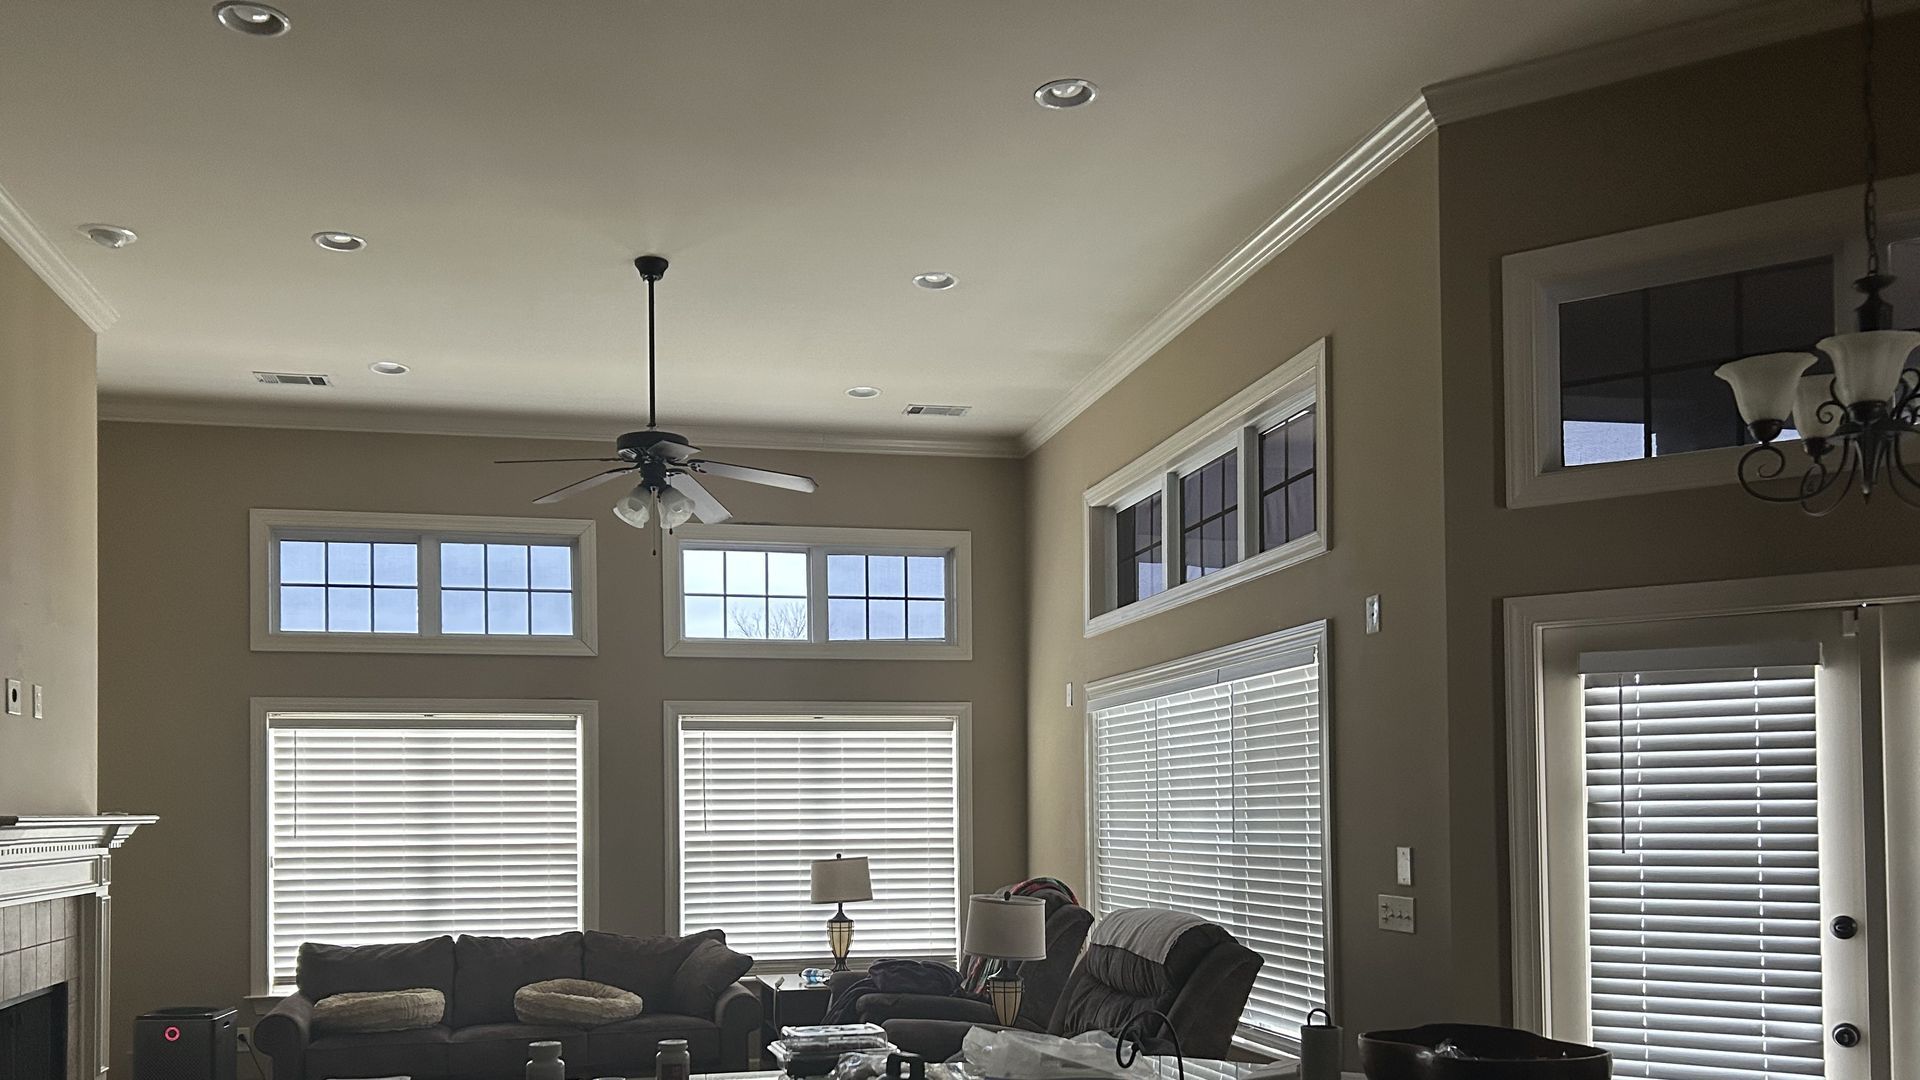 window treatment - Now the home tranquility and comfort comes easy with SPF Residential Tint. Deer Creek